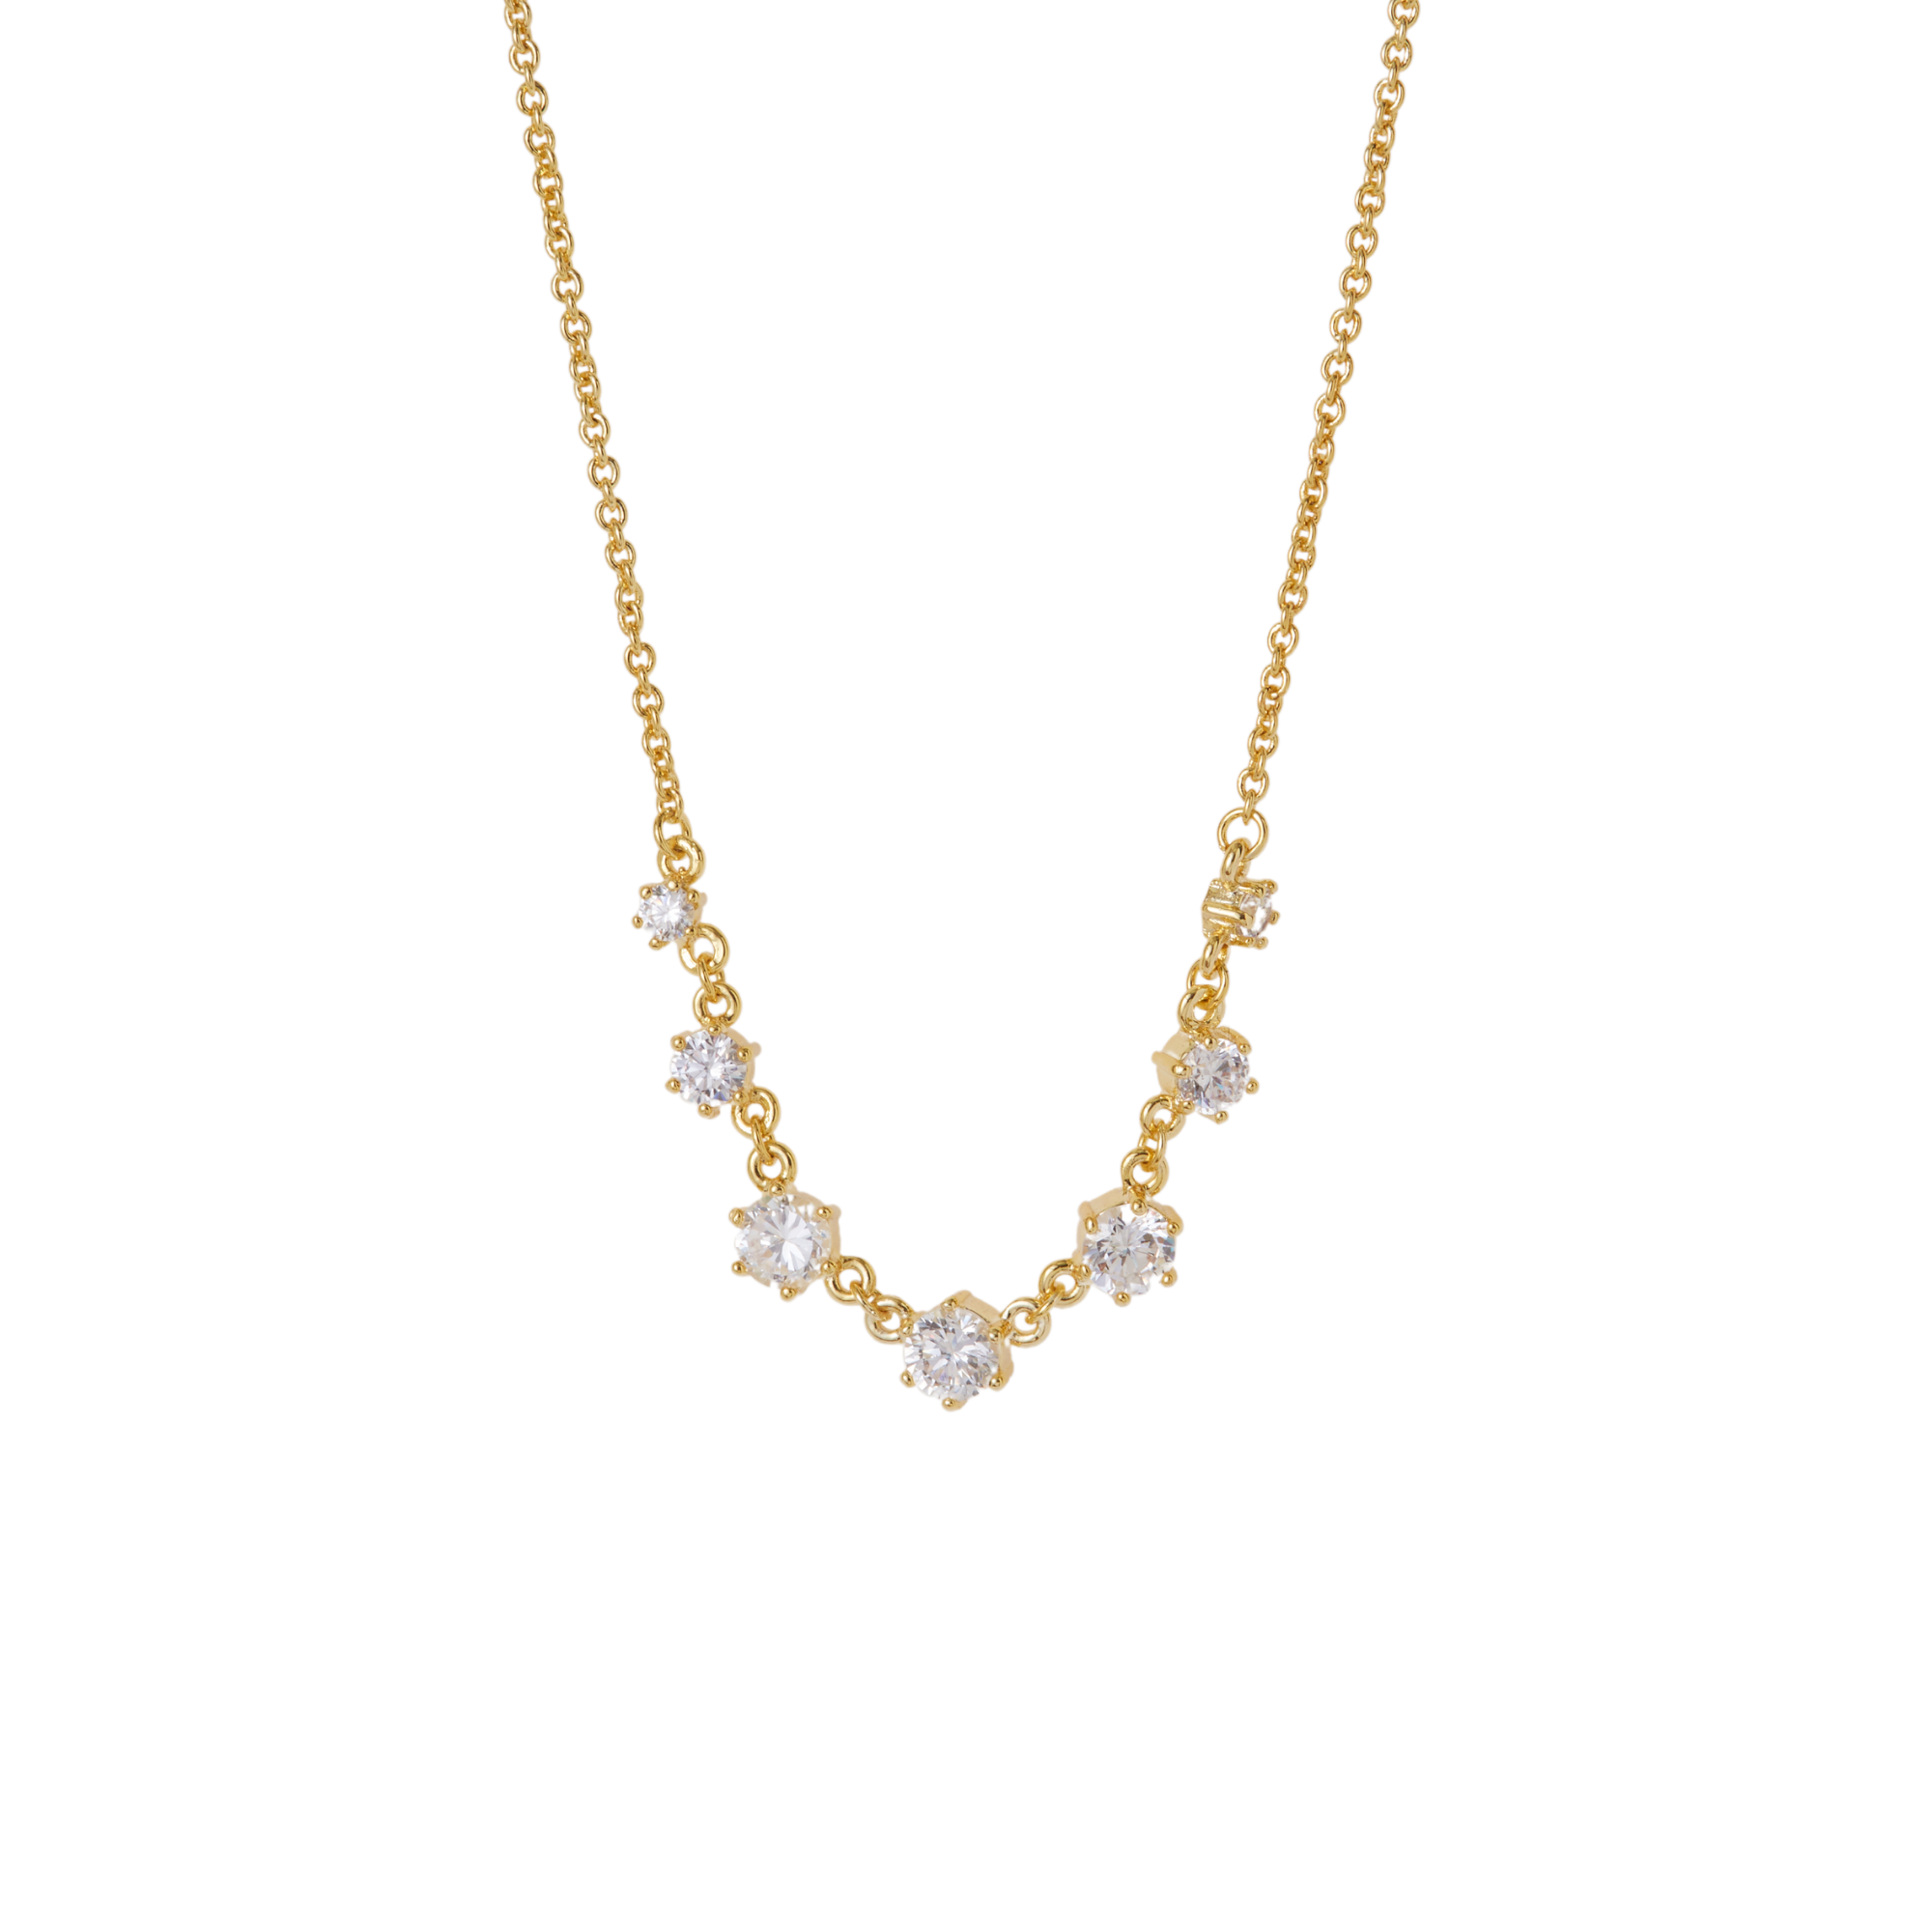 THE CZ ROSE NECKLACE